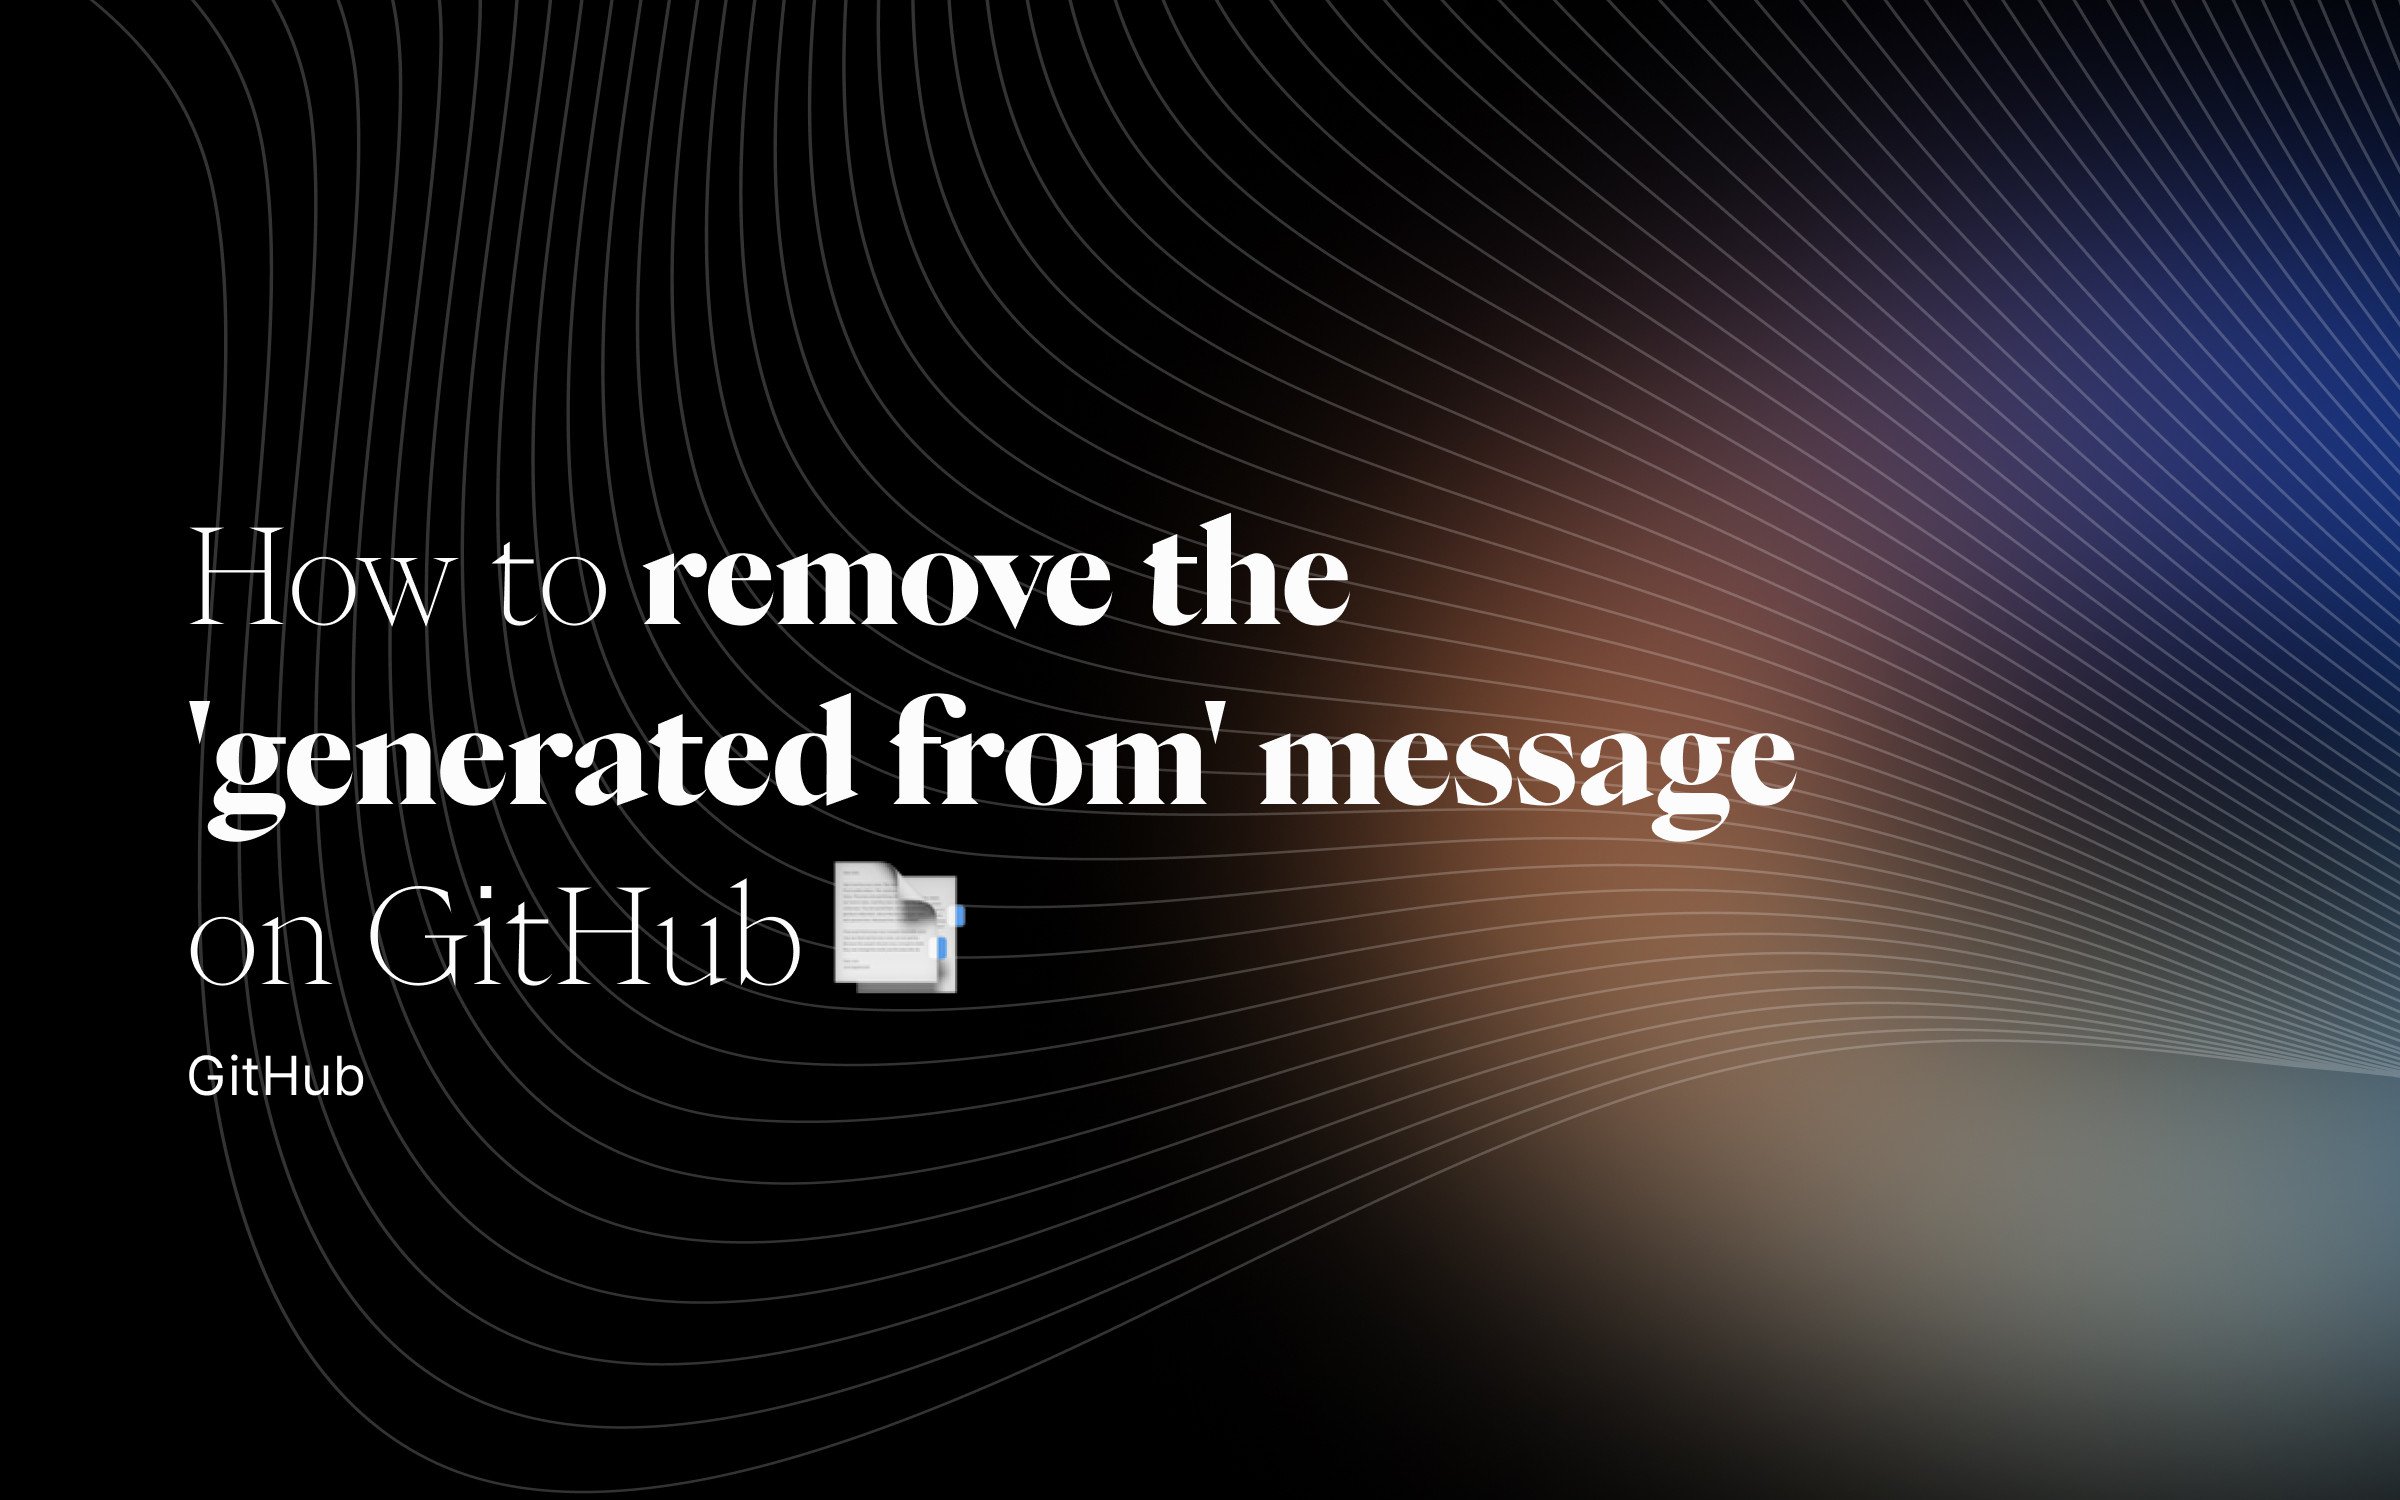 How to remove the 'generated from' message on GitHub